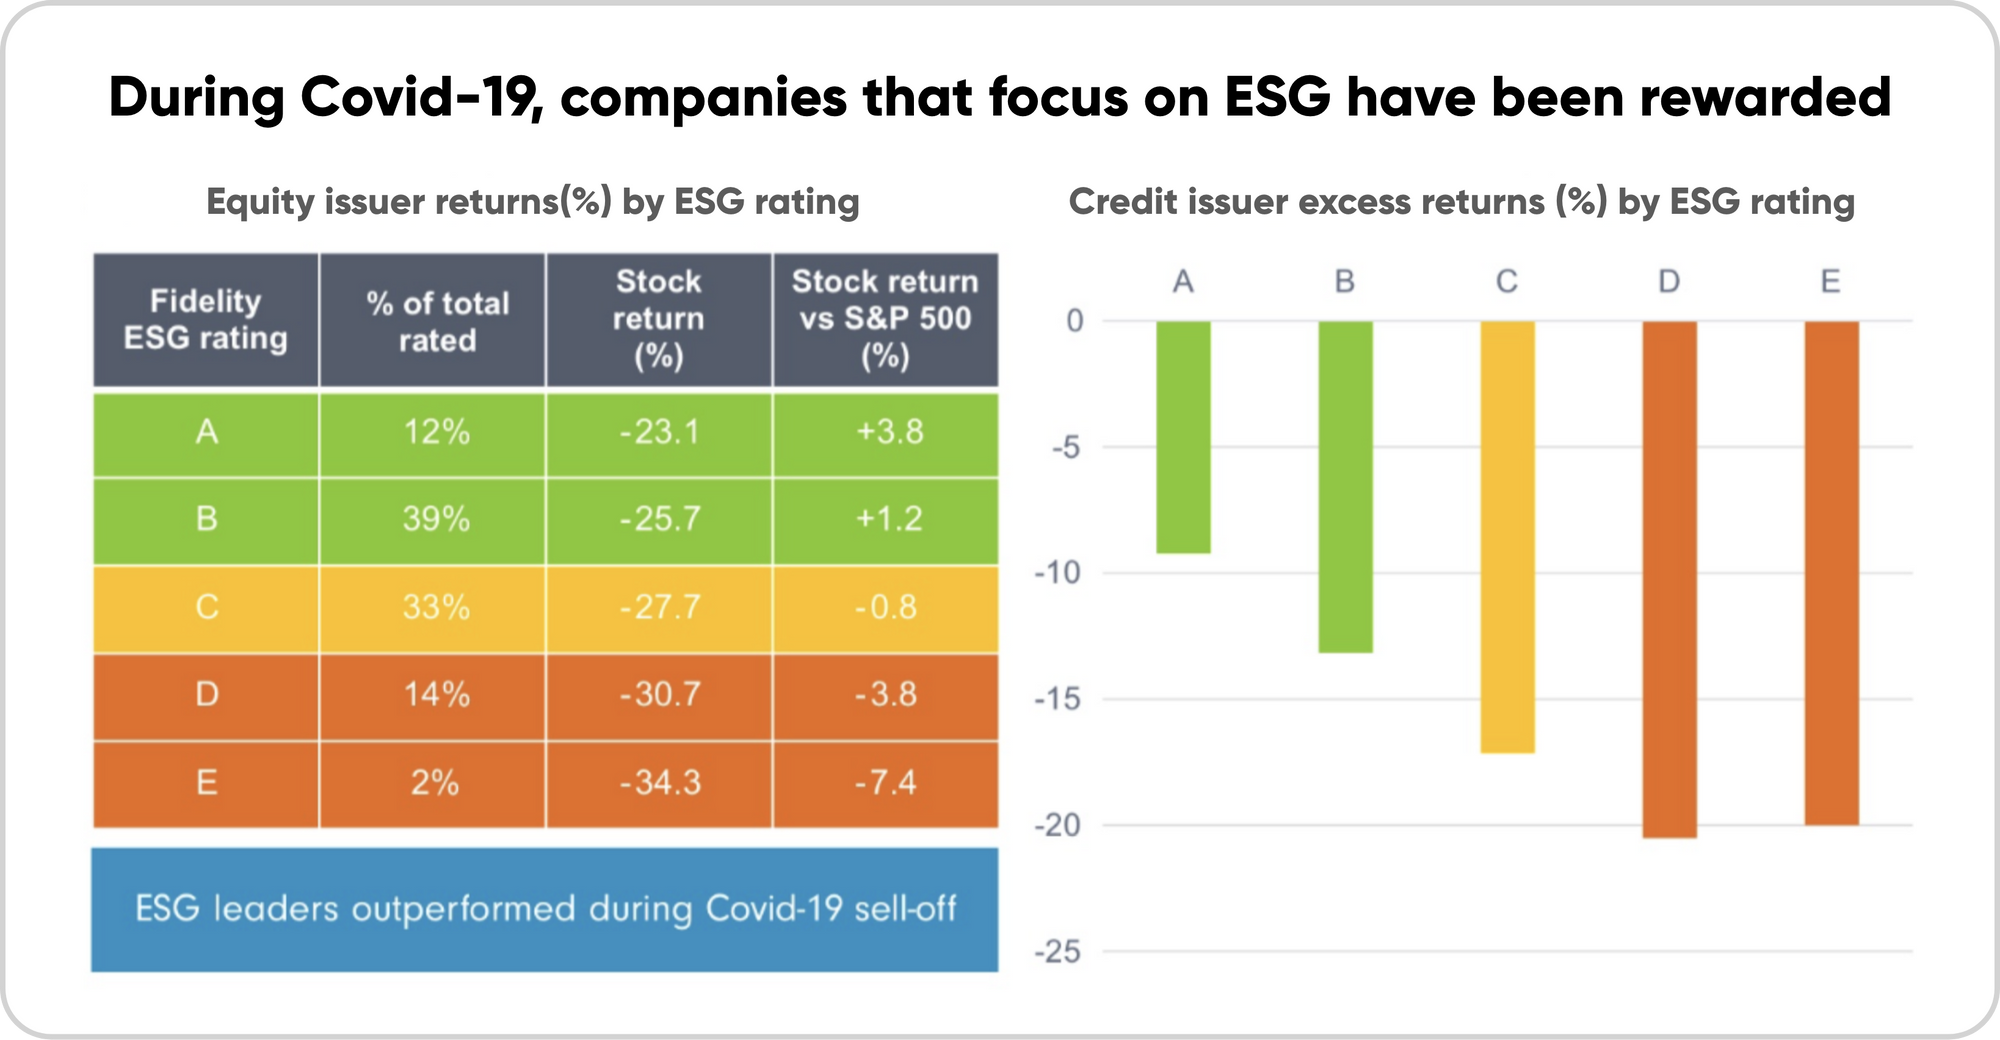 In 2020, companies with strong ESG ratings outperformed the overall market.